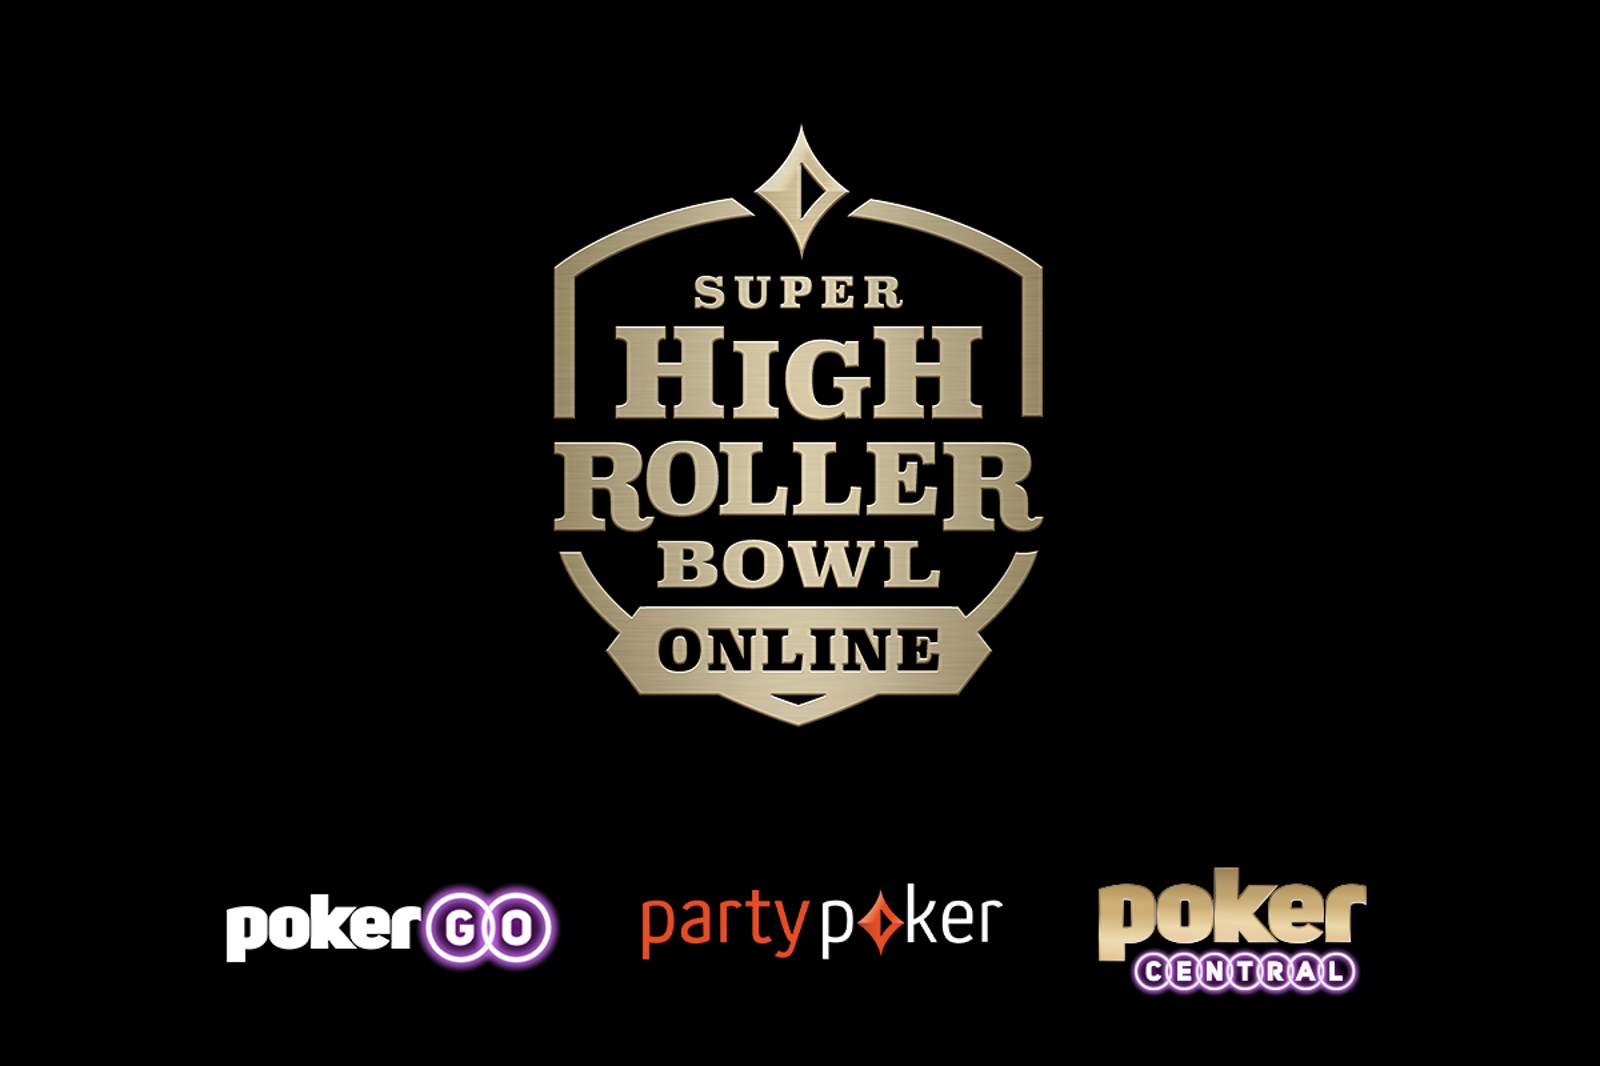 Super High Roller Bowl Online Series Brings $20 Million in Guarantees to partypoker